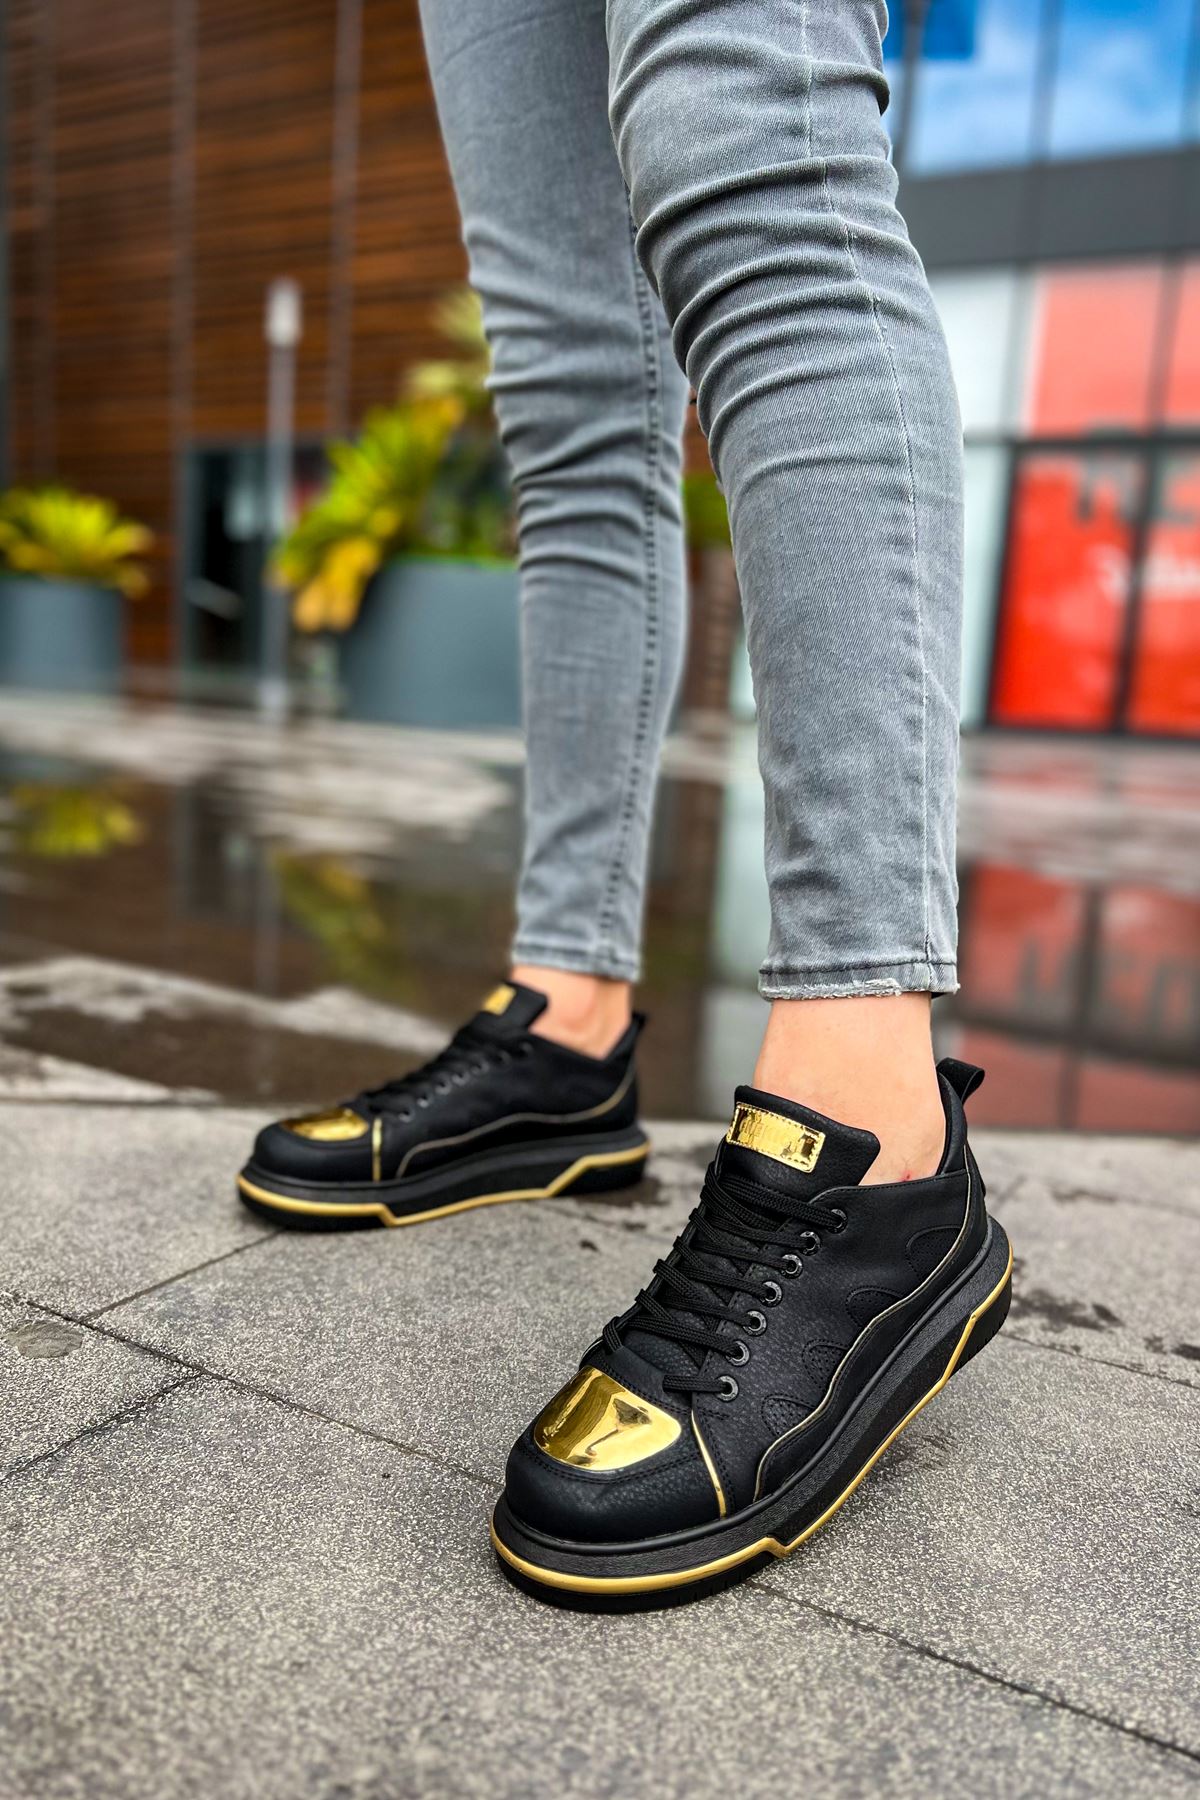 CH183 ST Men's Shoes BLACK/GOLD - STREETMODE ™